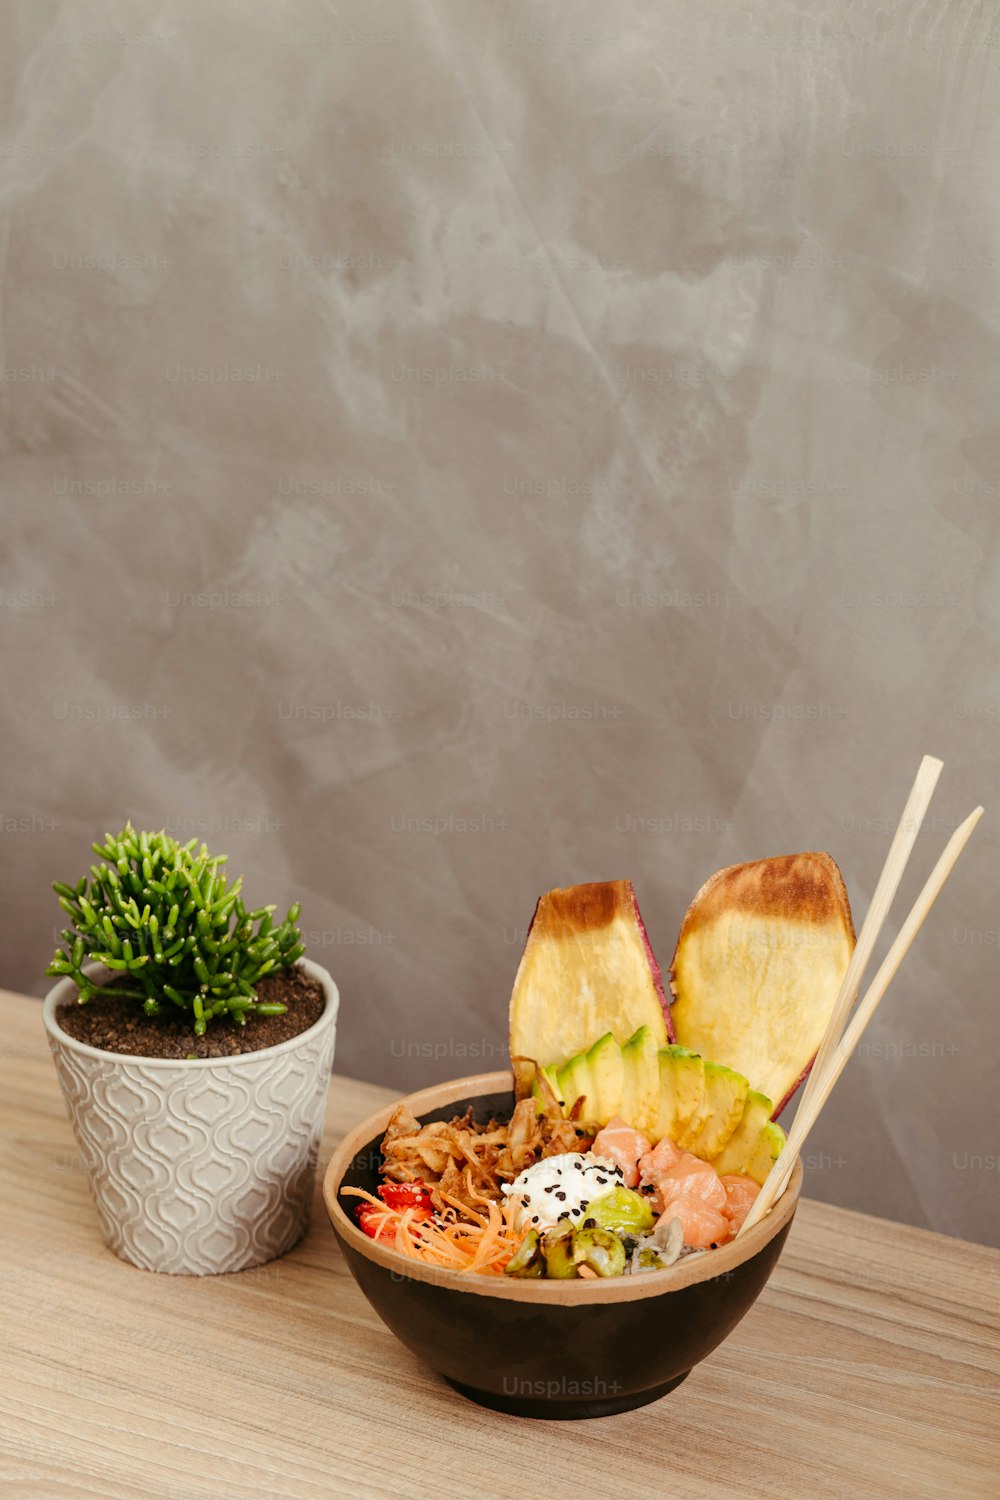 a bowl of noodles with chopsticks next to a potted plant